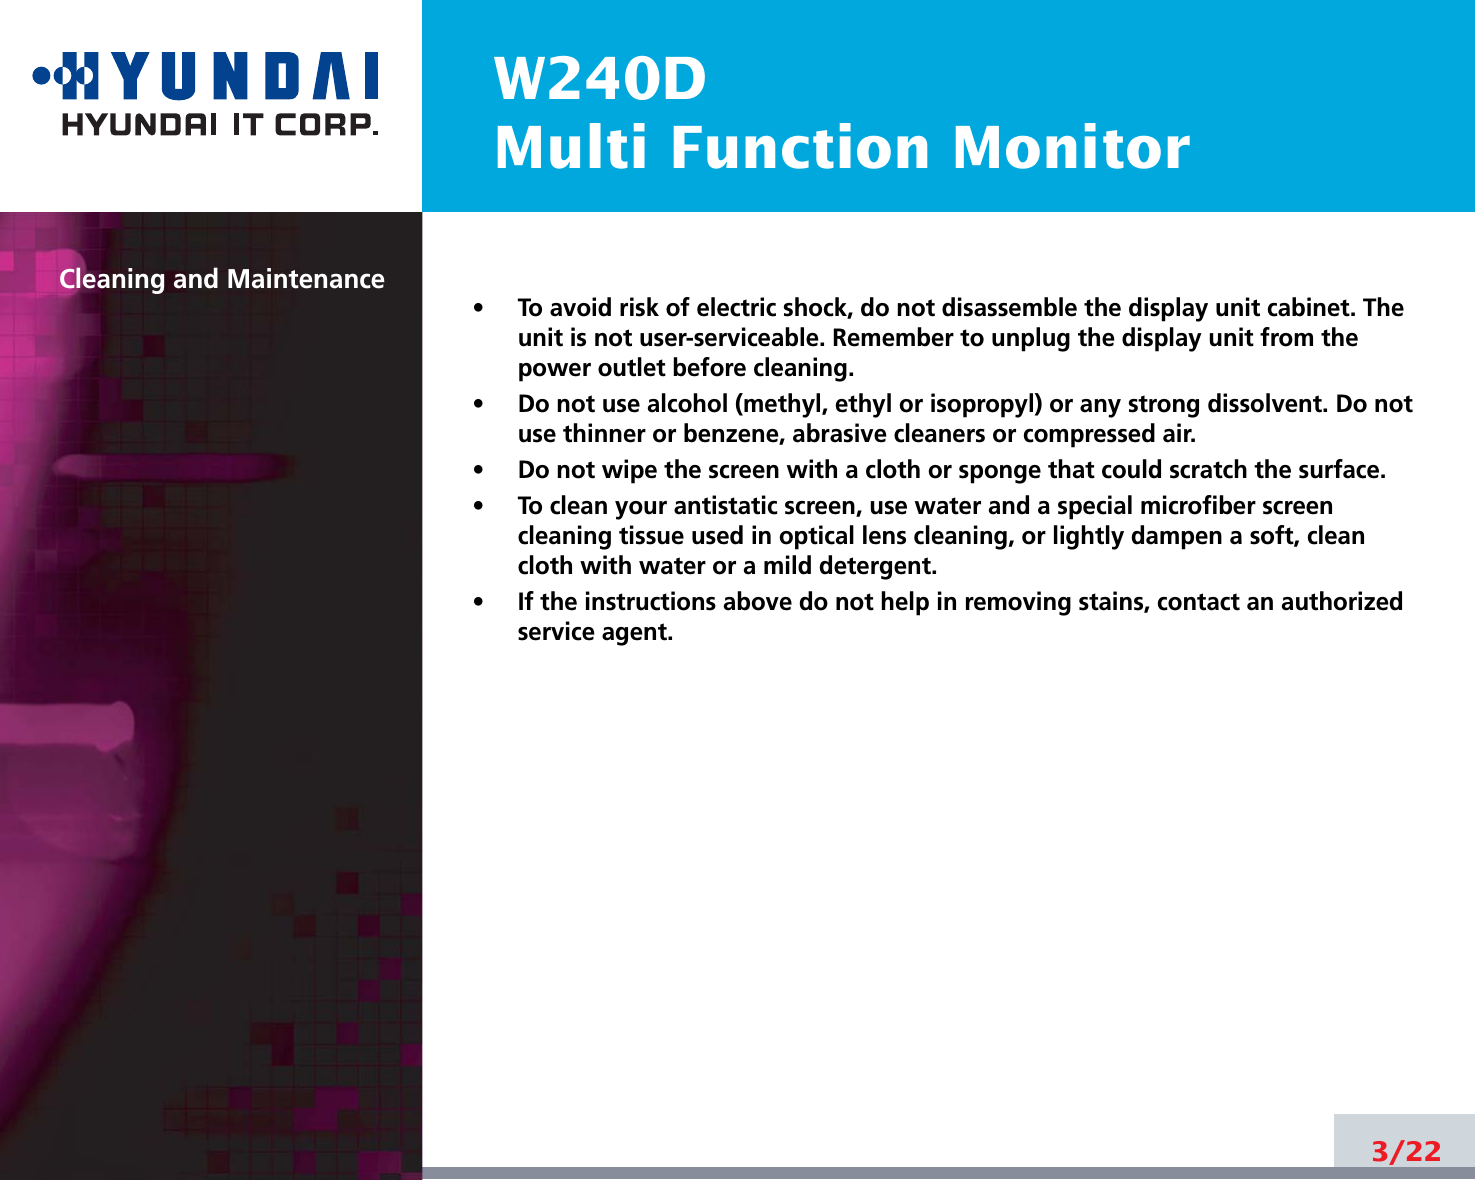 W240DMulti Function MonitorCleaning and Maintenance•     To avoid risk of electric shock, do not disassemble the display unit cabinet. Theunit is not user-serviceable. Remember to unplug the display unit from thepower outlet before cleaning.•     Do not use alcohol (methyl, ethyl or isopropyl) or any strong dissolvent. Do notuse thinner or benzene, abrasive cleaners or compressed air.•     Do not wipe the screen with a cloth or sponge that could scratch the surface.•     To clean your antistatic screen, use water and a special microfiber screencleaning tissue used in optical lens cleaning, or lightly dampen a soft, cleancloth with water or a mild detergent.•     If the instructions above do not help in removing stains, contact an authorizedservice agent. 3/22